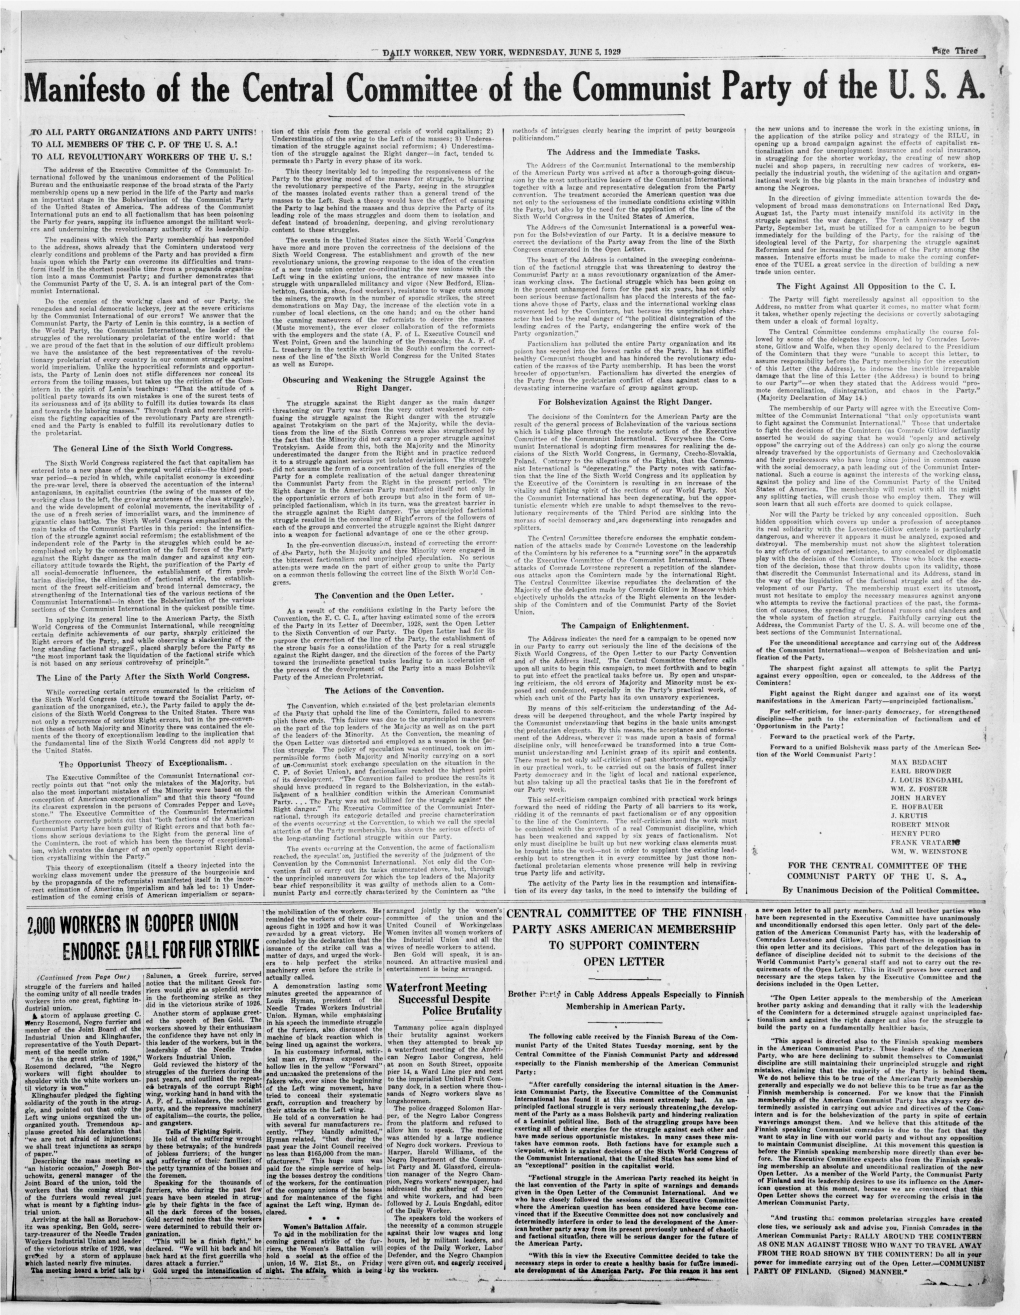 Manifesto of the Central Committee of the Communist Party of the U